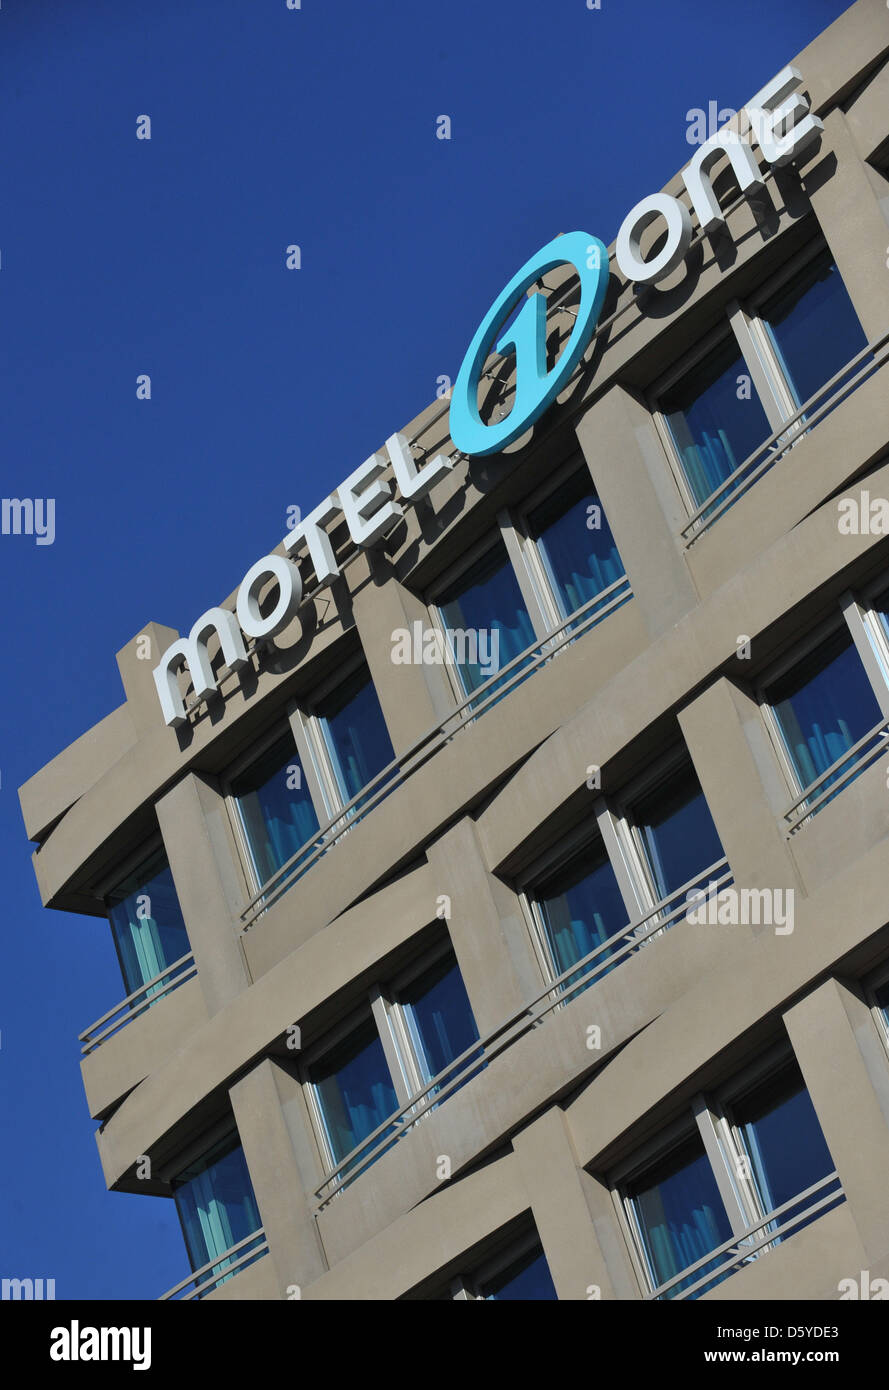 The logo of the hotel chain Motel One is pictured at one of the